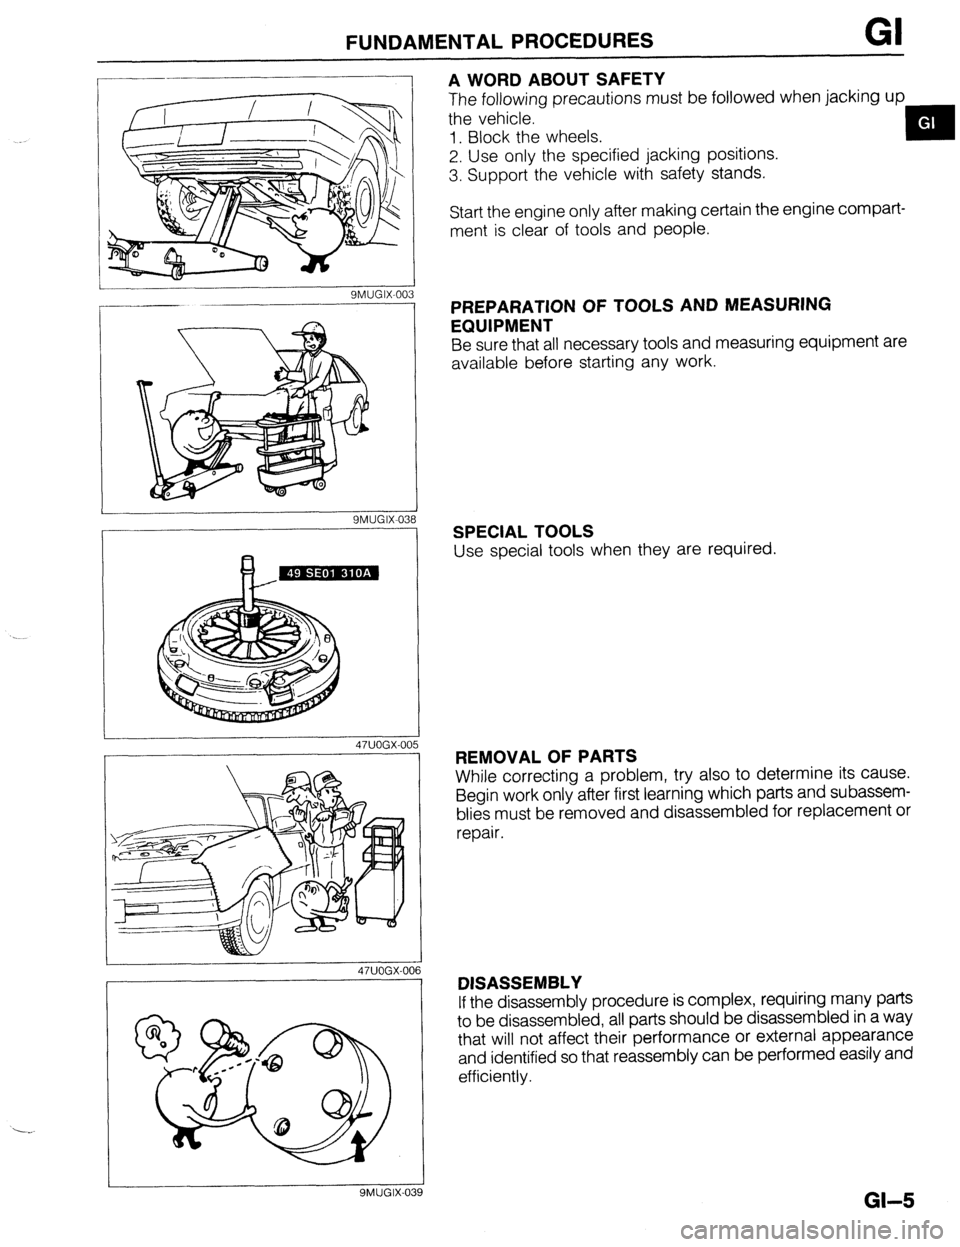 MAZDA PROTEGE 1992  Workshop Manual FUNDAMENTALPROCEDURES GI 
SMUGIX-0: B 
47UOGX-00 5  ‘3 
16 
A WORD ABOUT SAFETY 
The following precautions must be followed when jacking up 
the vehicle. 
1. Block the wheels. 
2. Use only the speci